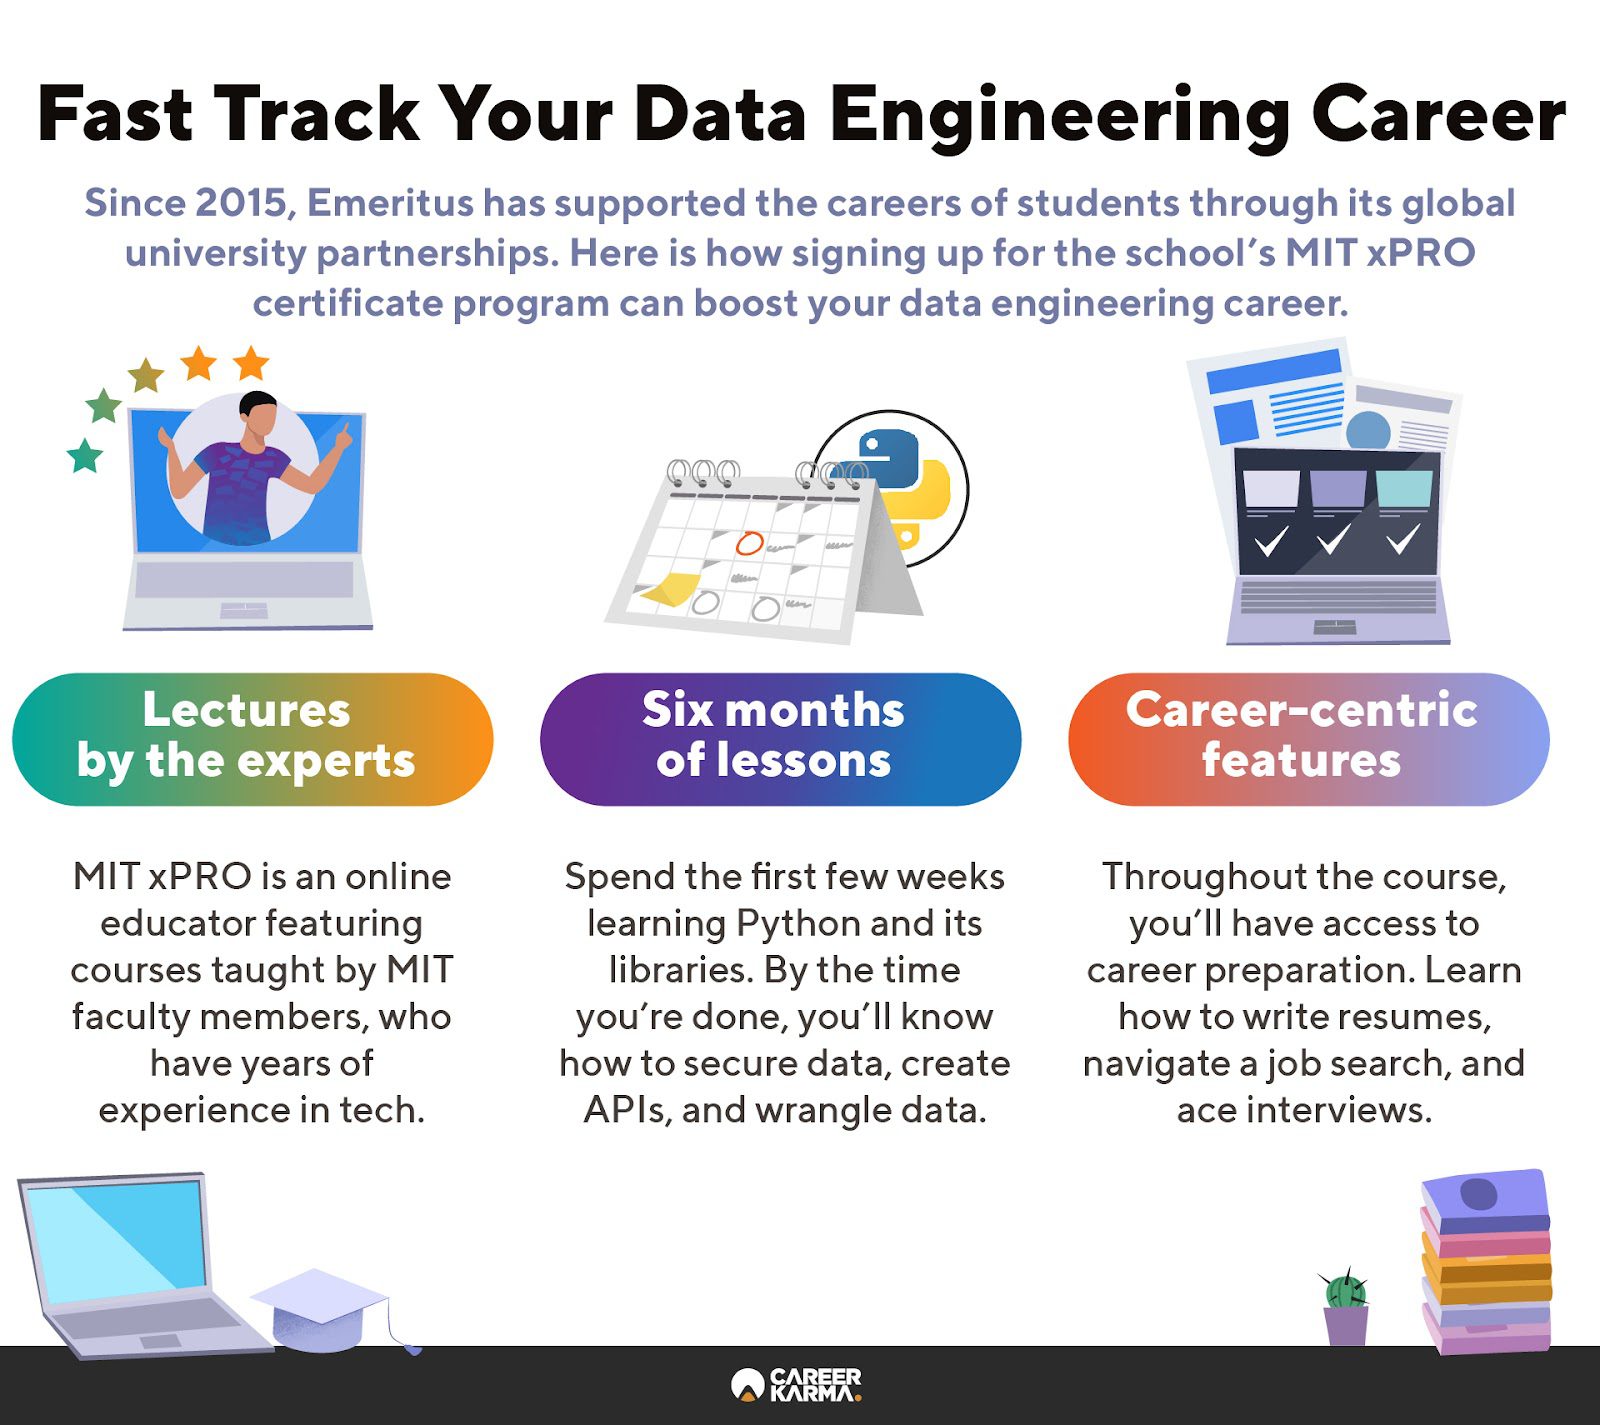 An infographic highlighting the key features of MIT xPro’s Professional Certificate in Data Engineering